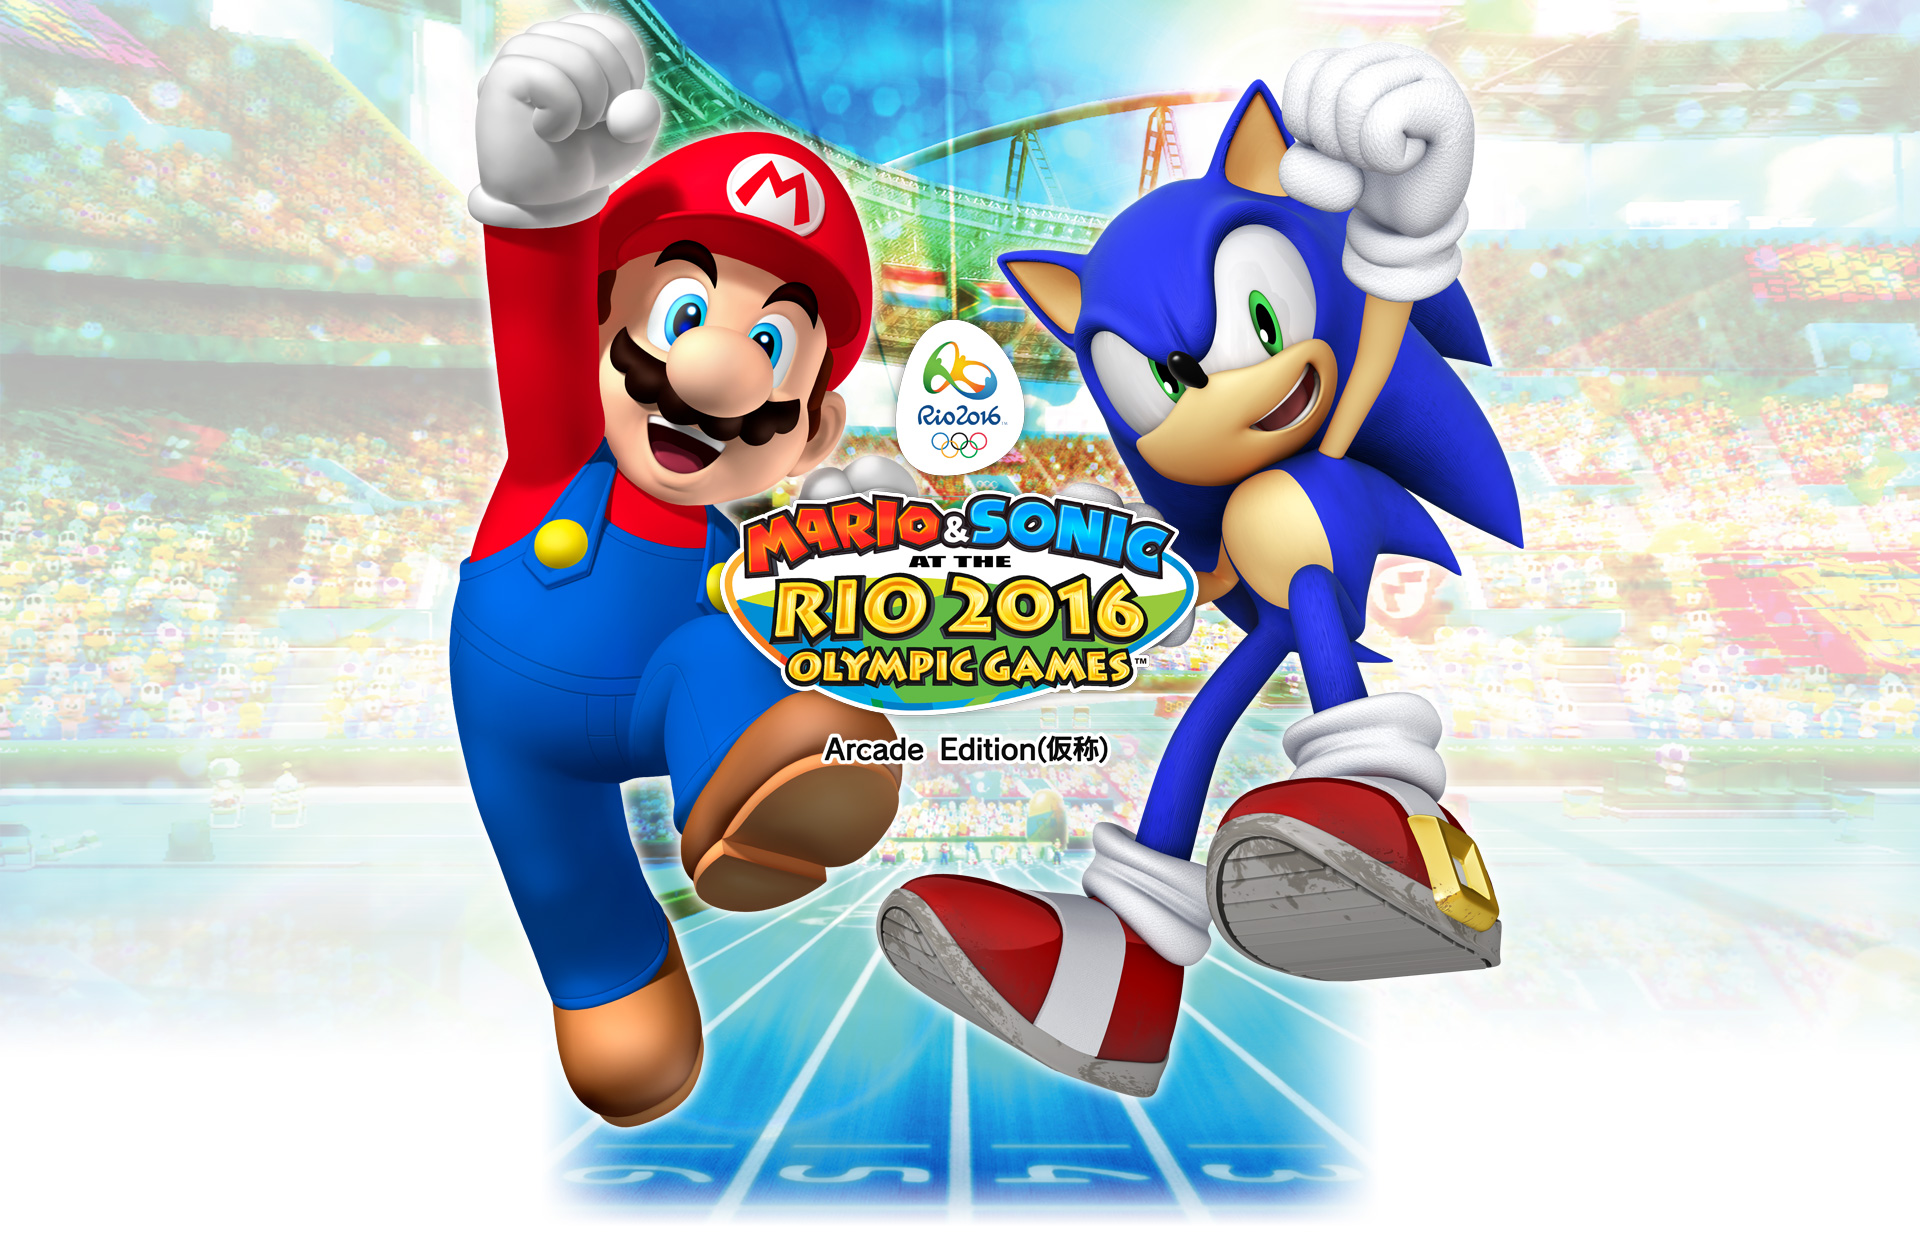 Mario & Sonic at the Rio 2016 Olympic Games heading to Japanese arcades in Spring 2016 ...